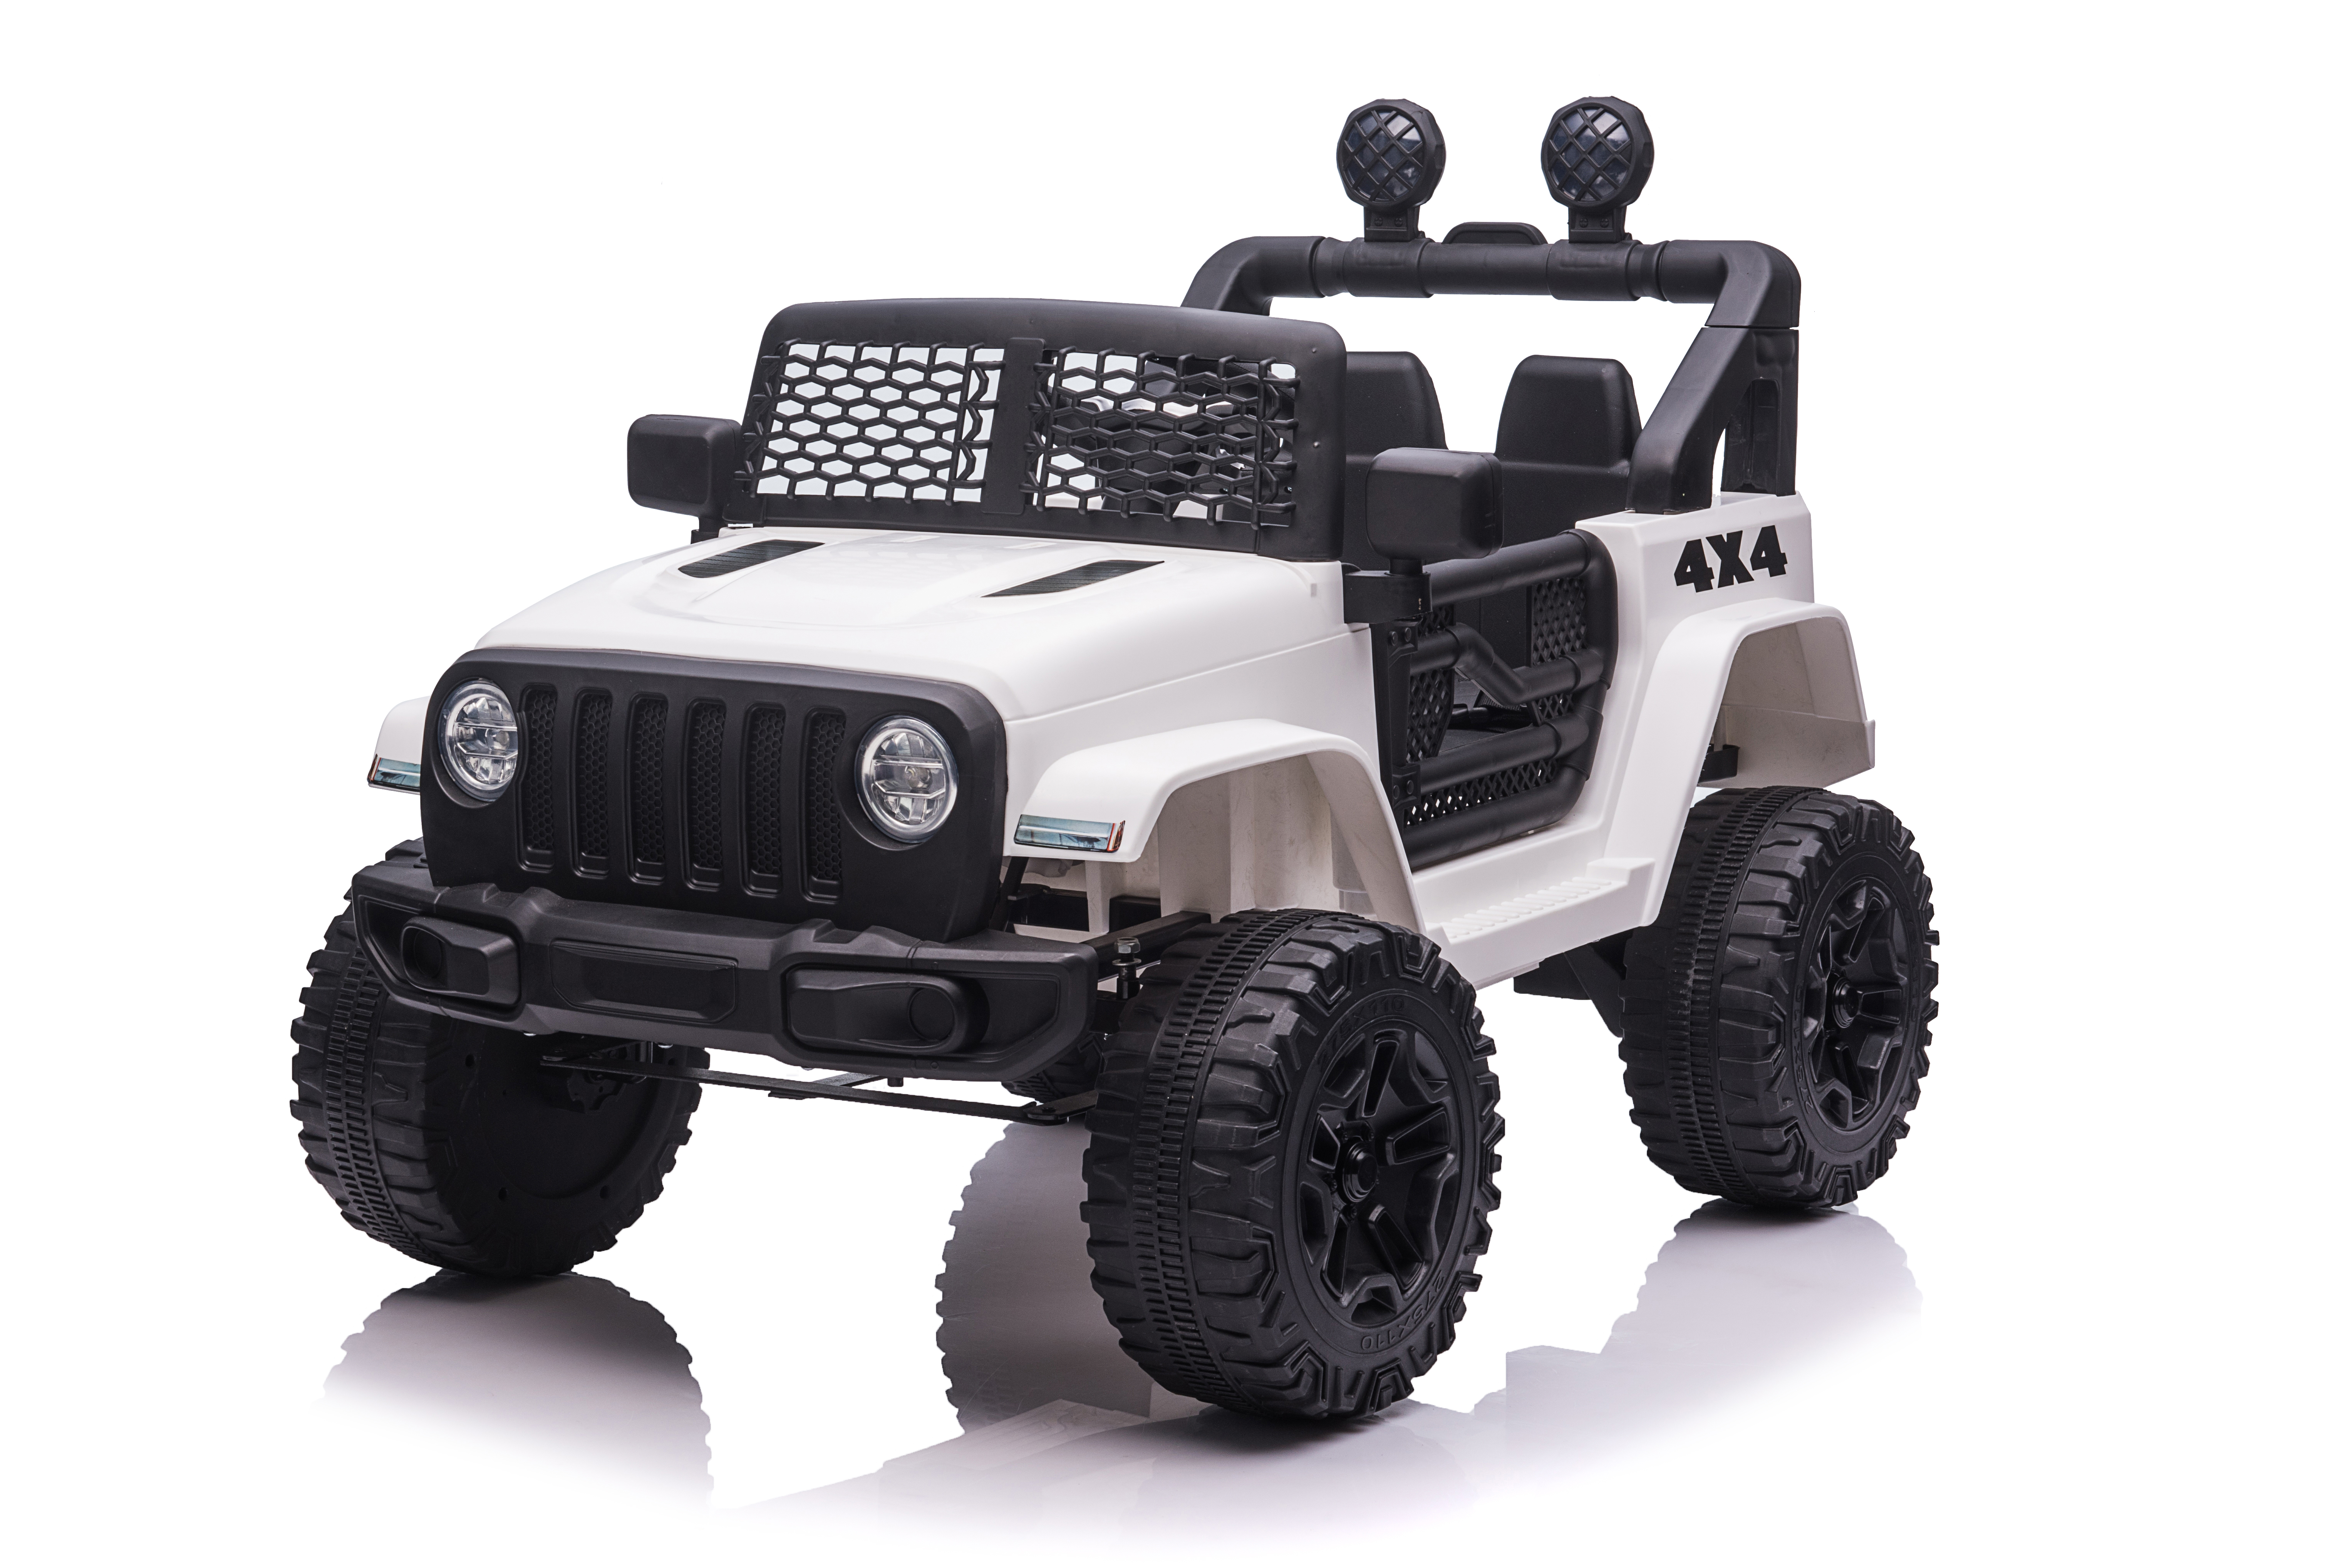 New arrival jeep one button start, , high and low speed, horn, front light, power display, light control button, two doors can open, 2.4G R/C, four wheel absorber, pull rod, seat belt-Boyel Living